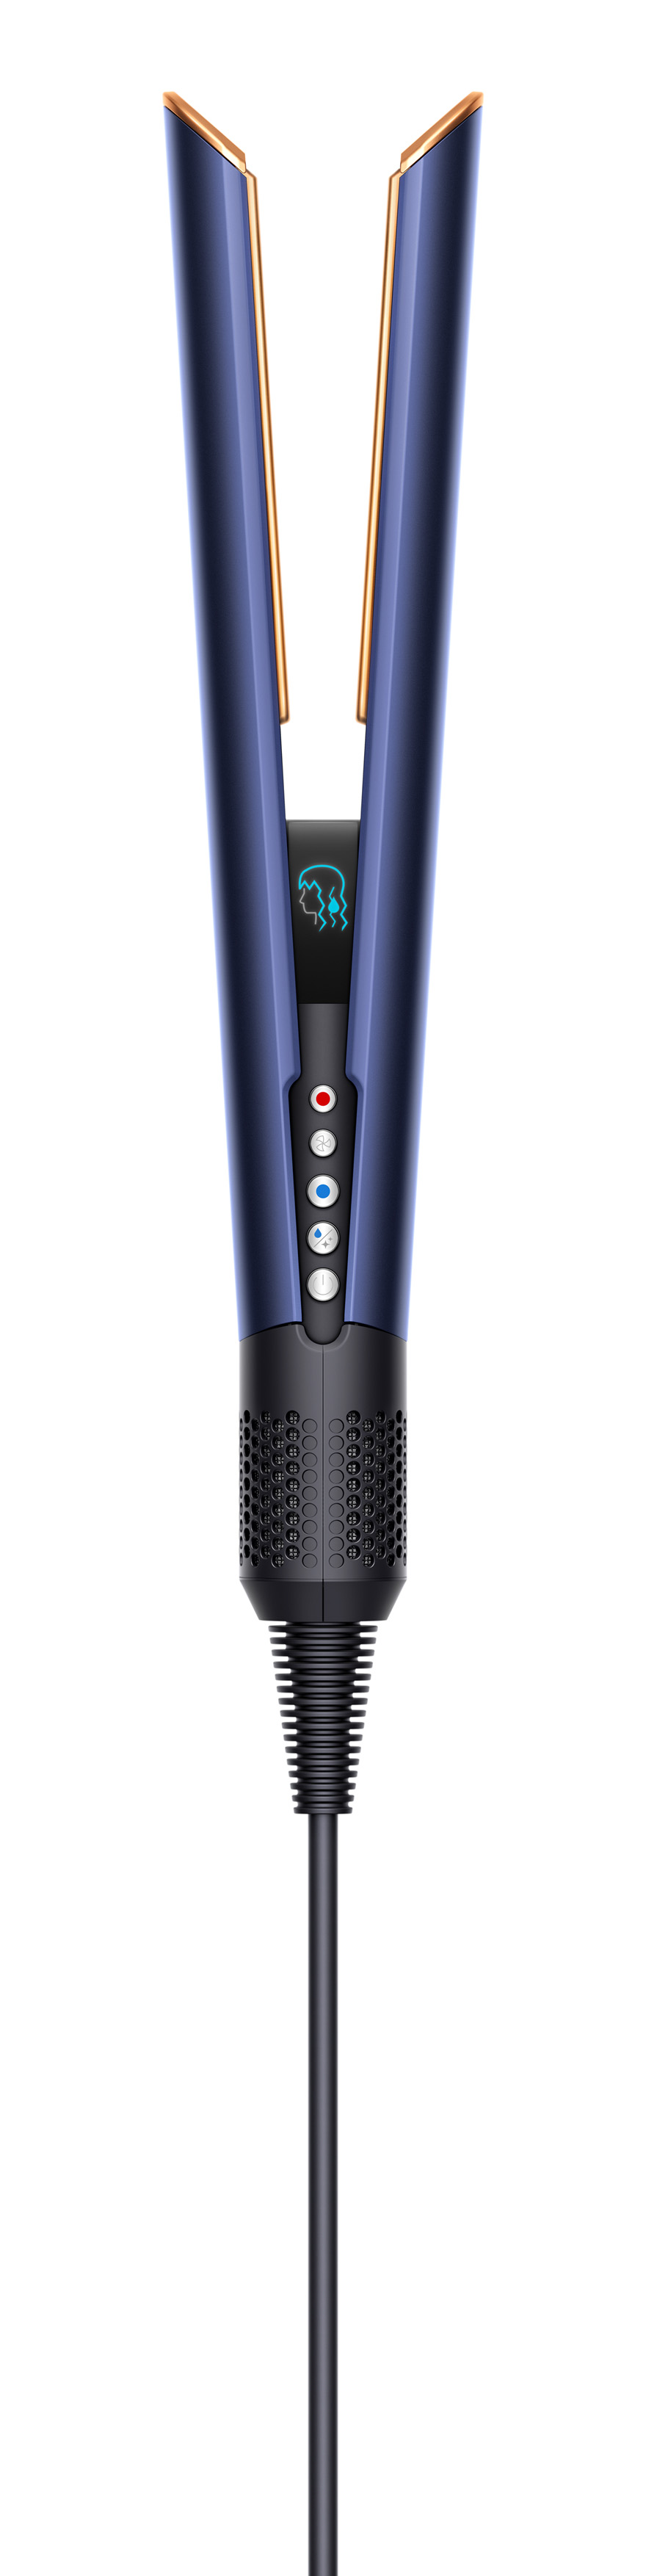 Image_Dyson_Airstrait_standalone_05